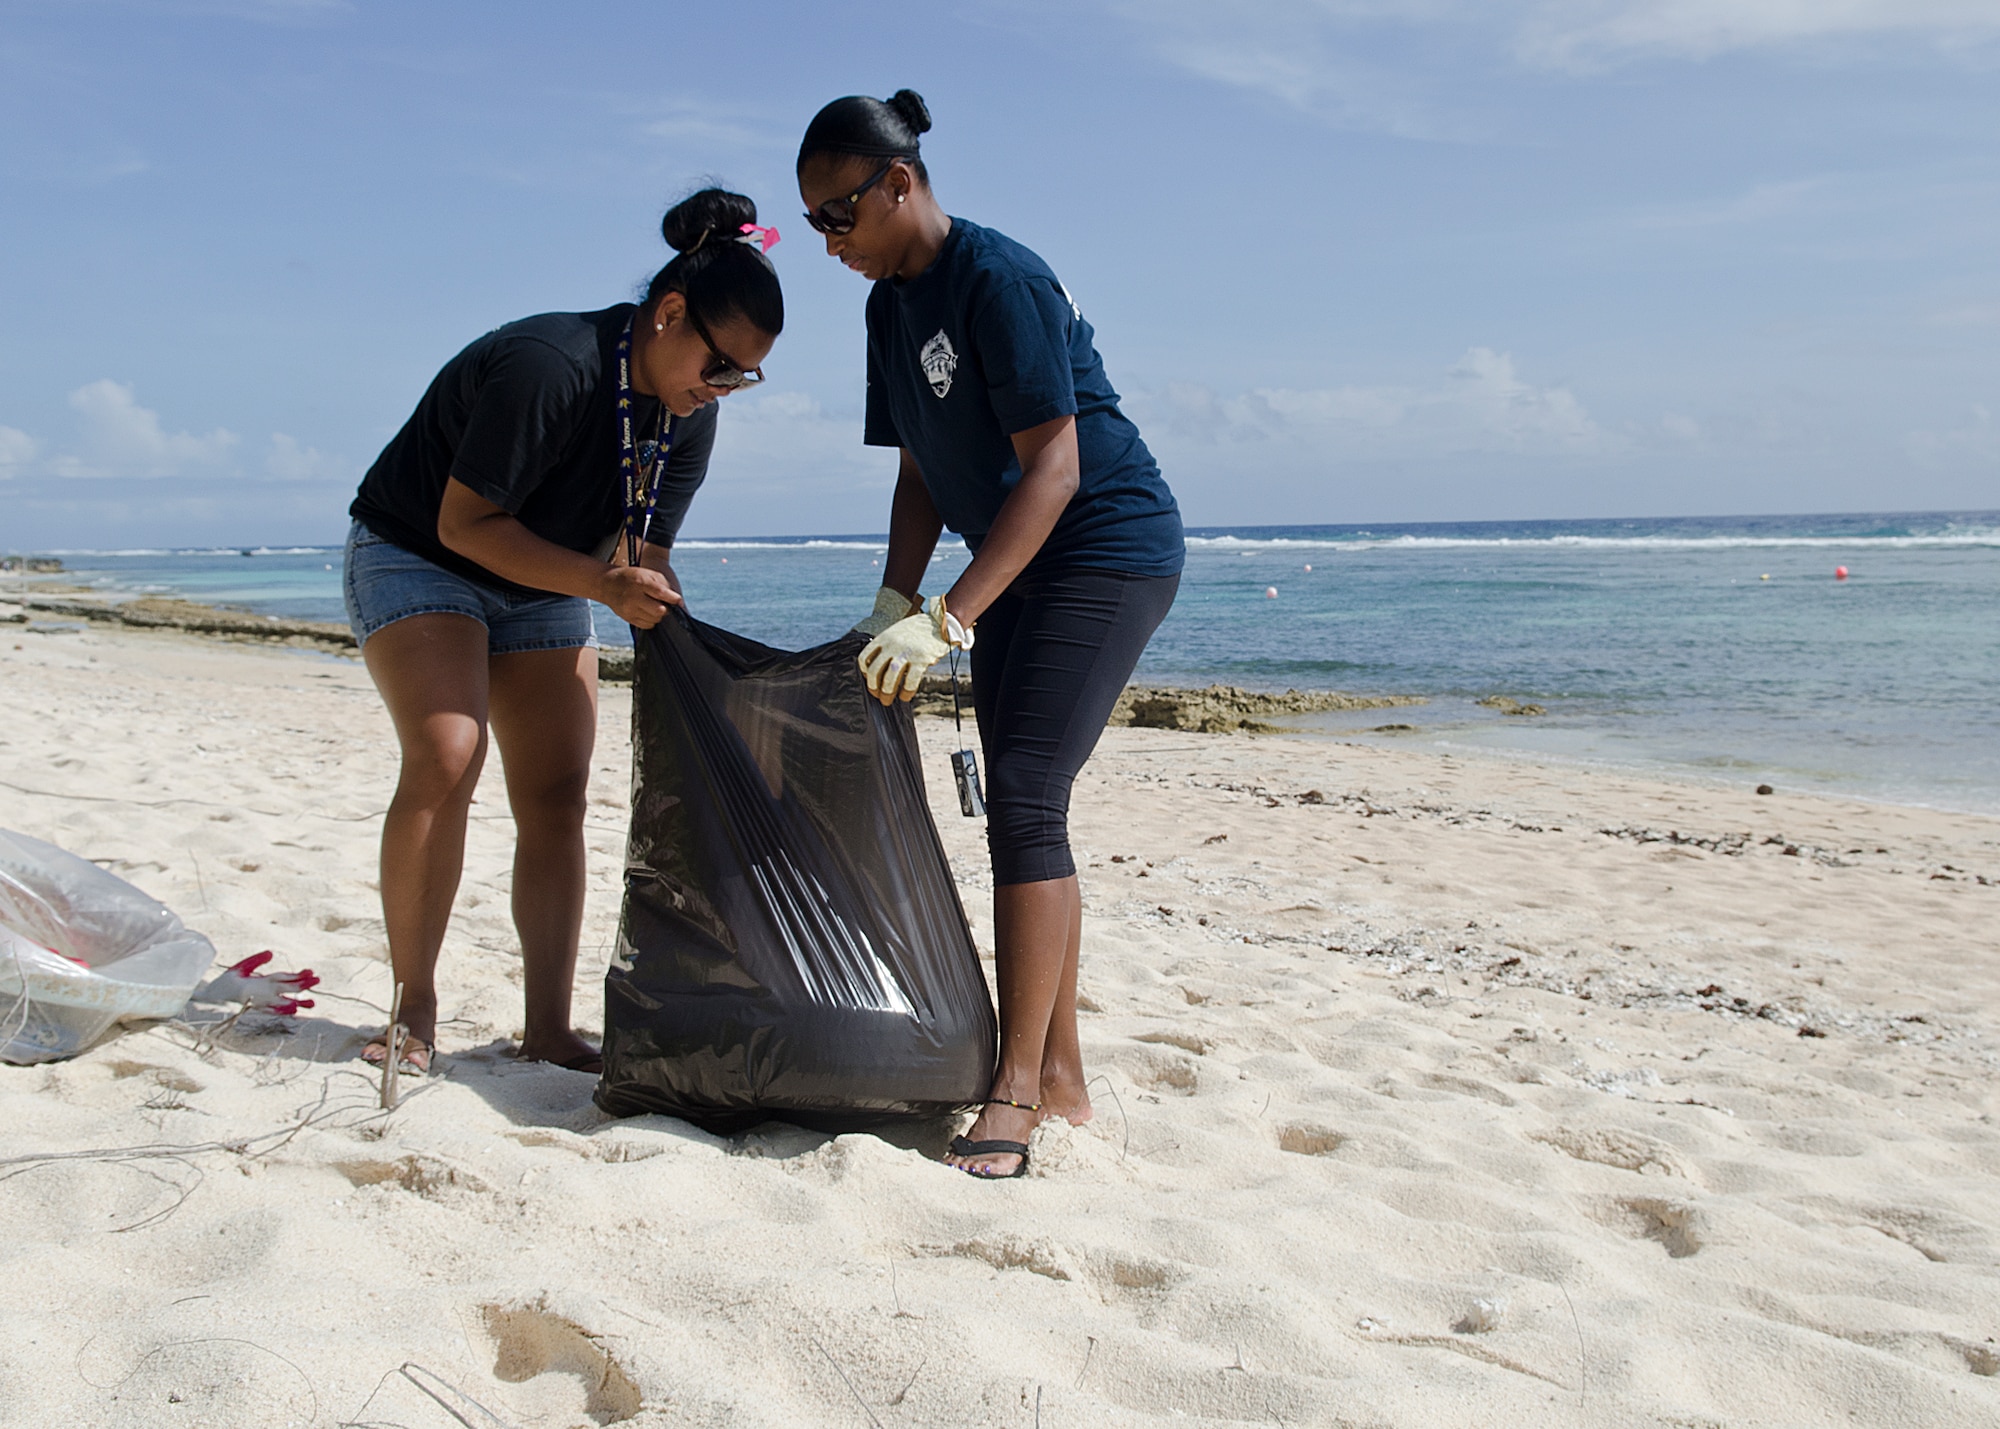 Navy Petty Officer 1st Class Petagaye Blair, Naval Airborne Weapons Maintenance Unit 1 leading petty officer, and Navy Petty Officer 2nd Class Deardre Bebeau, Supply logistics specialist, bag a tire for recycling during the 2nd Annual Earth Day Tarague Beach Cleanup on Andersen Air Force Base, Guam.  The base holds official beach cleanups twice each year, for Earth Day and then again in September for the annual Guam International Coastal Cleanup, though Boys and Girl Scouts and other civic organizations perform beach cleanups throughout the year.(U.S. Air Force photo by Senior Airman Katrina Brisbin/Released)